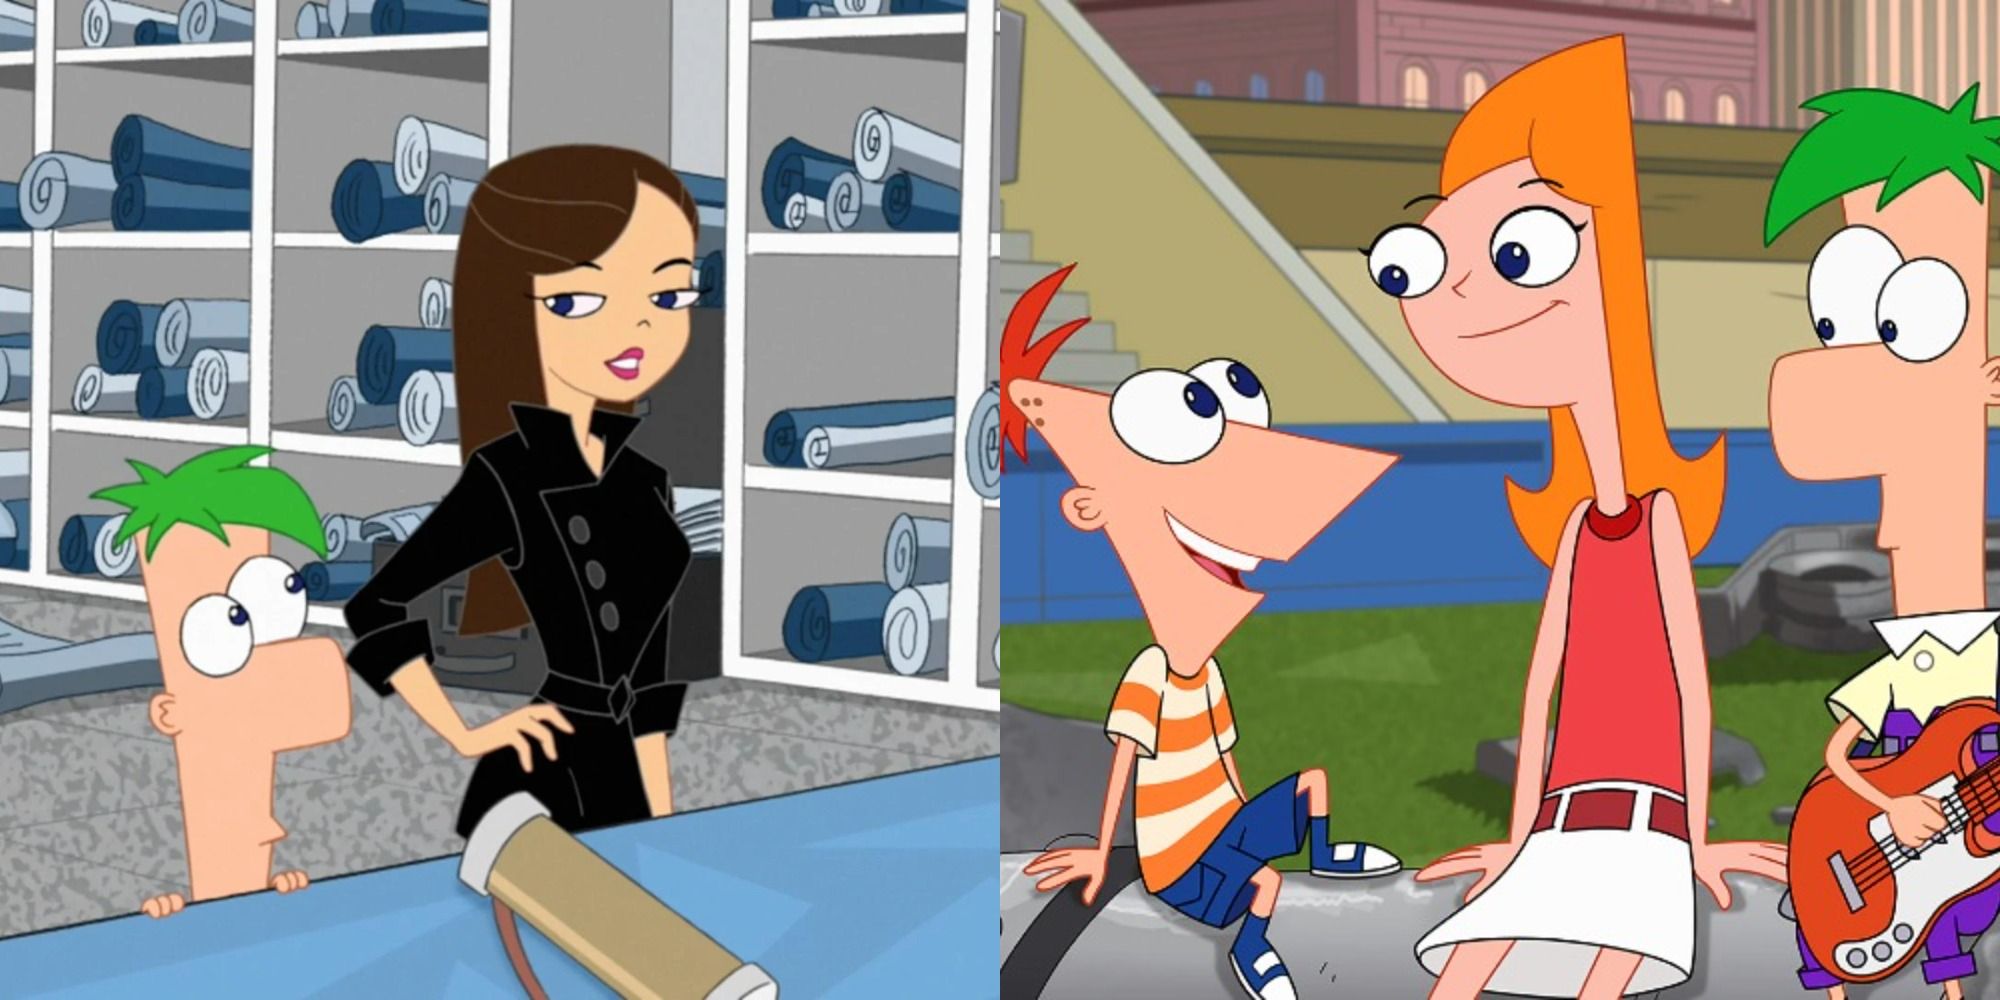 A split image of Ferb talking to Vanessa and him talking to Candace and Phineas